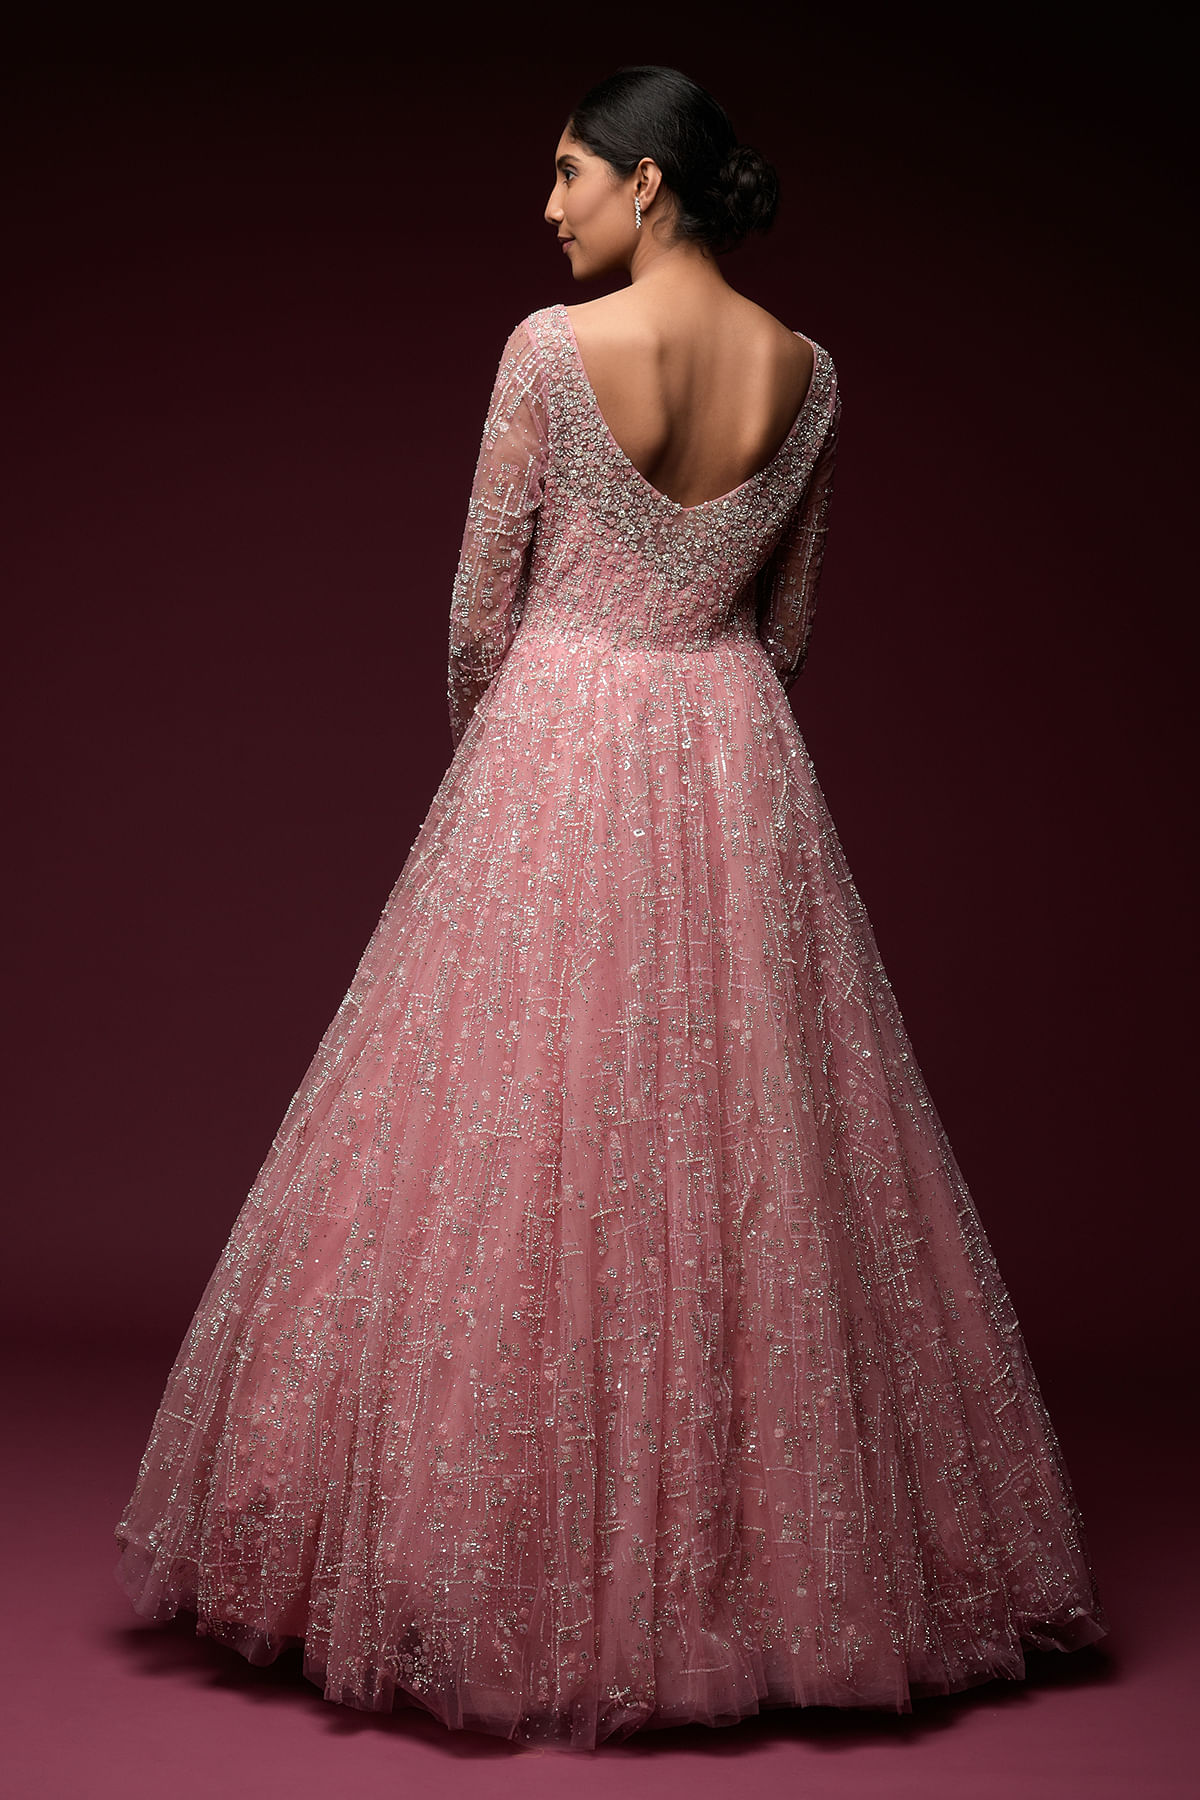 Beauty at its best in the ombre powder pink ball gown. | Pink evening  dress, Fashion dresses, Pink ball gown